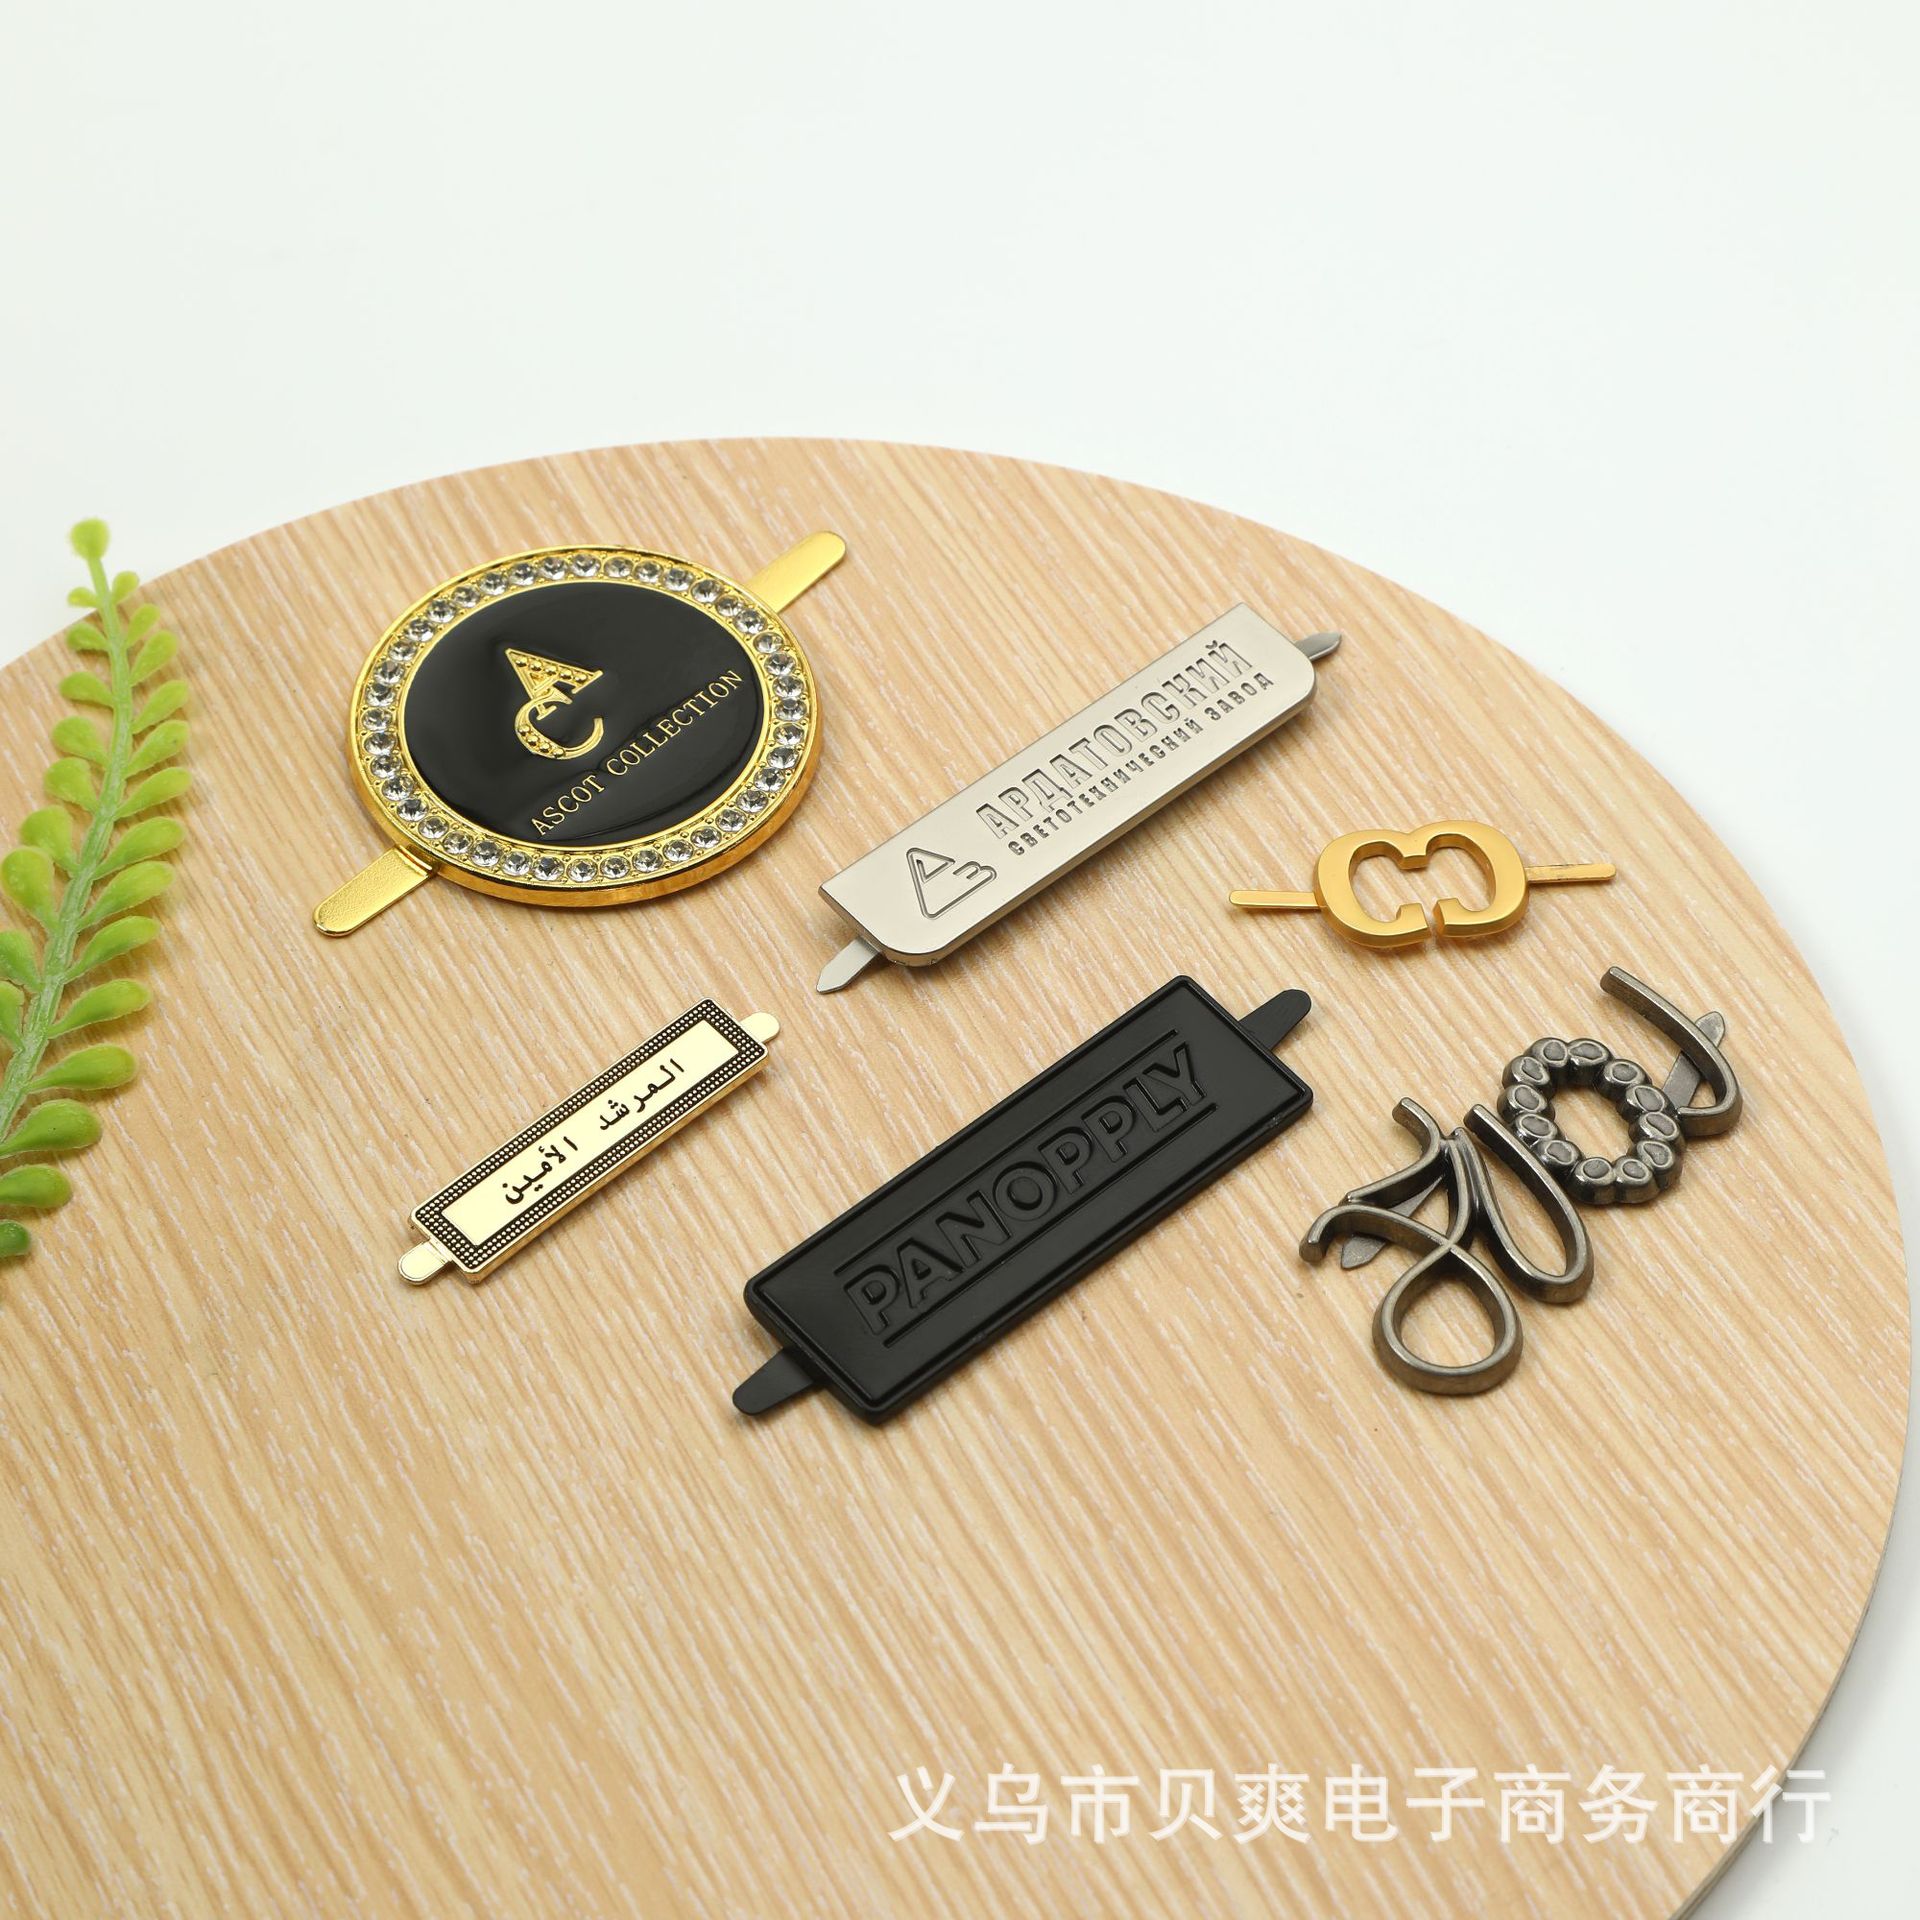 Yiwu New Pin Stitching Sign Wallet Box Coat and Cap Nameplate Can Be Customized in Various Shapes, Sizes and Colors